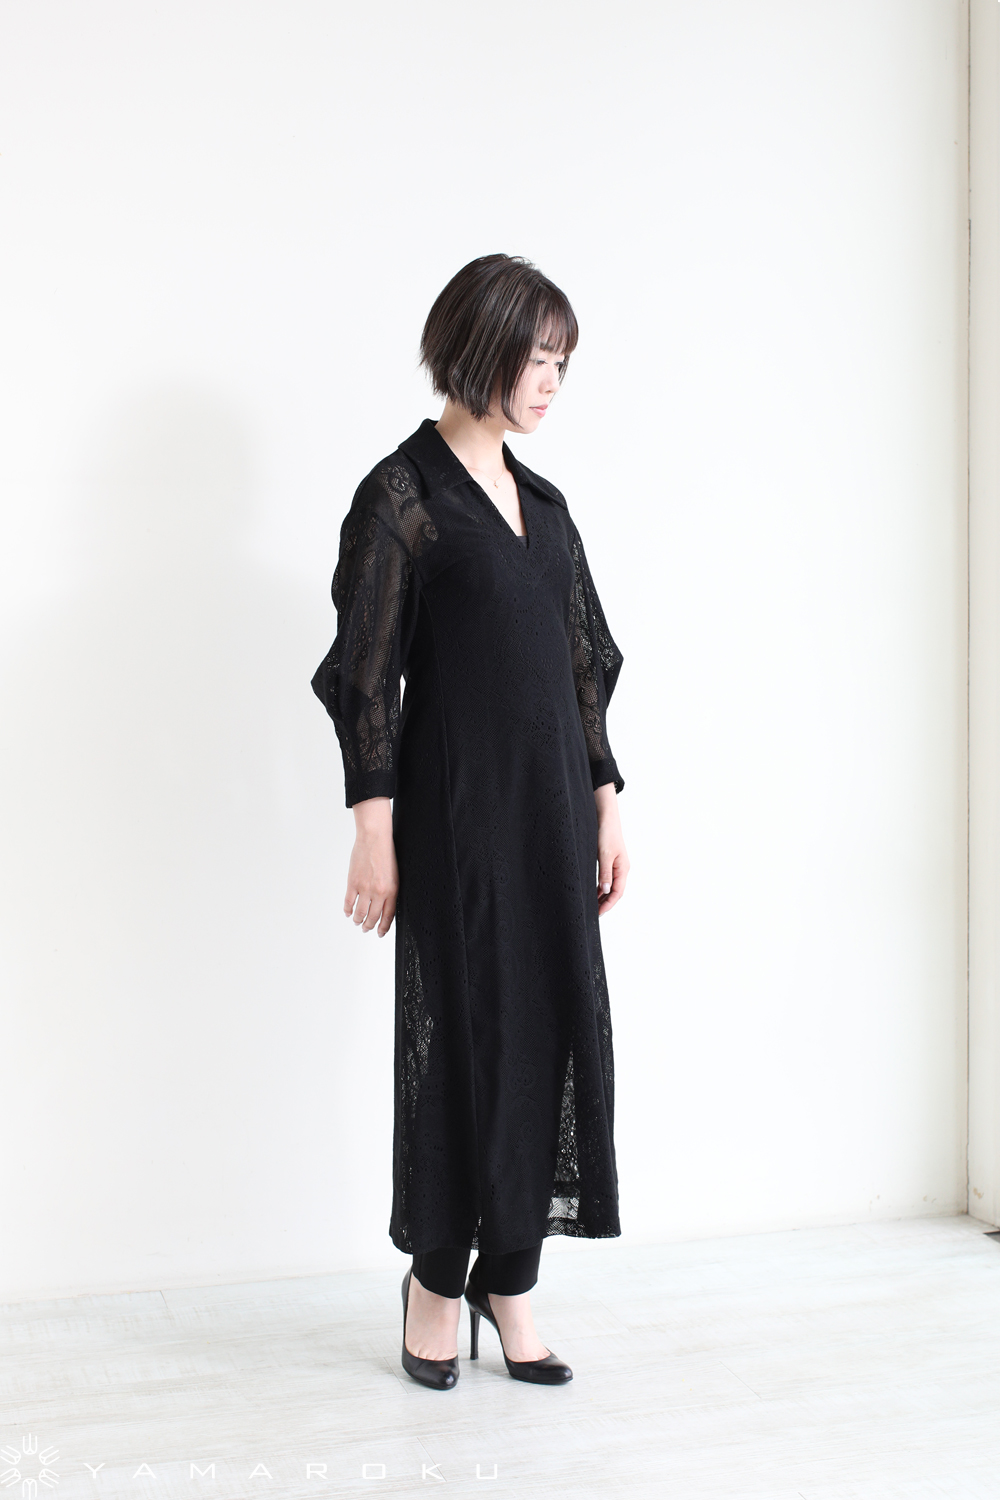 mame Curtain Lace Jacquard Jersey Top